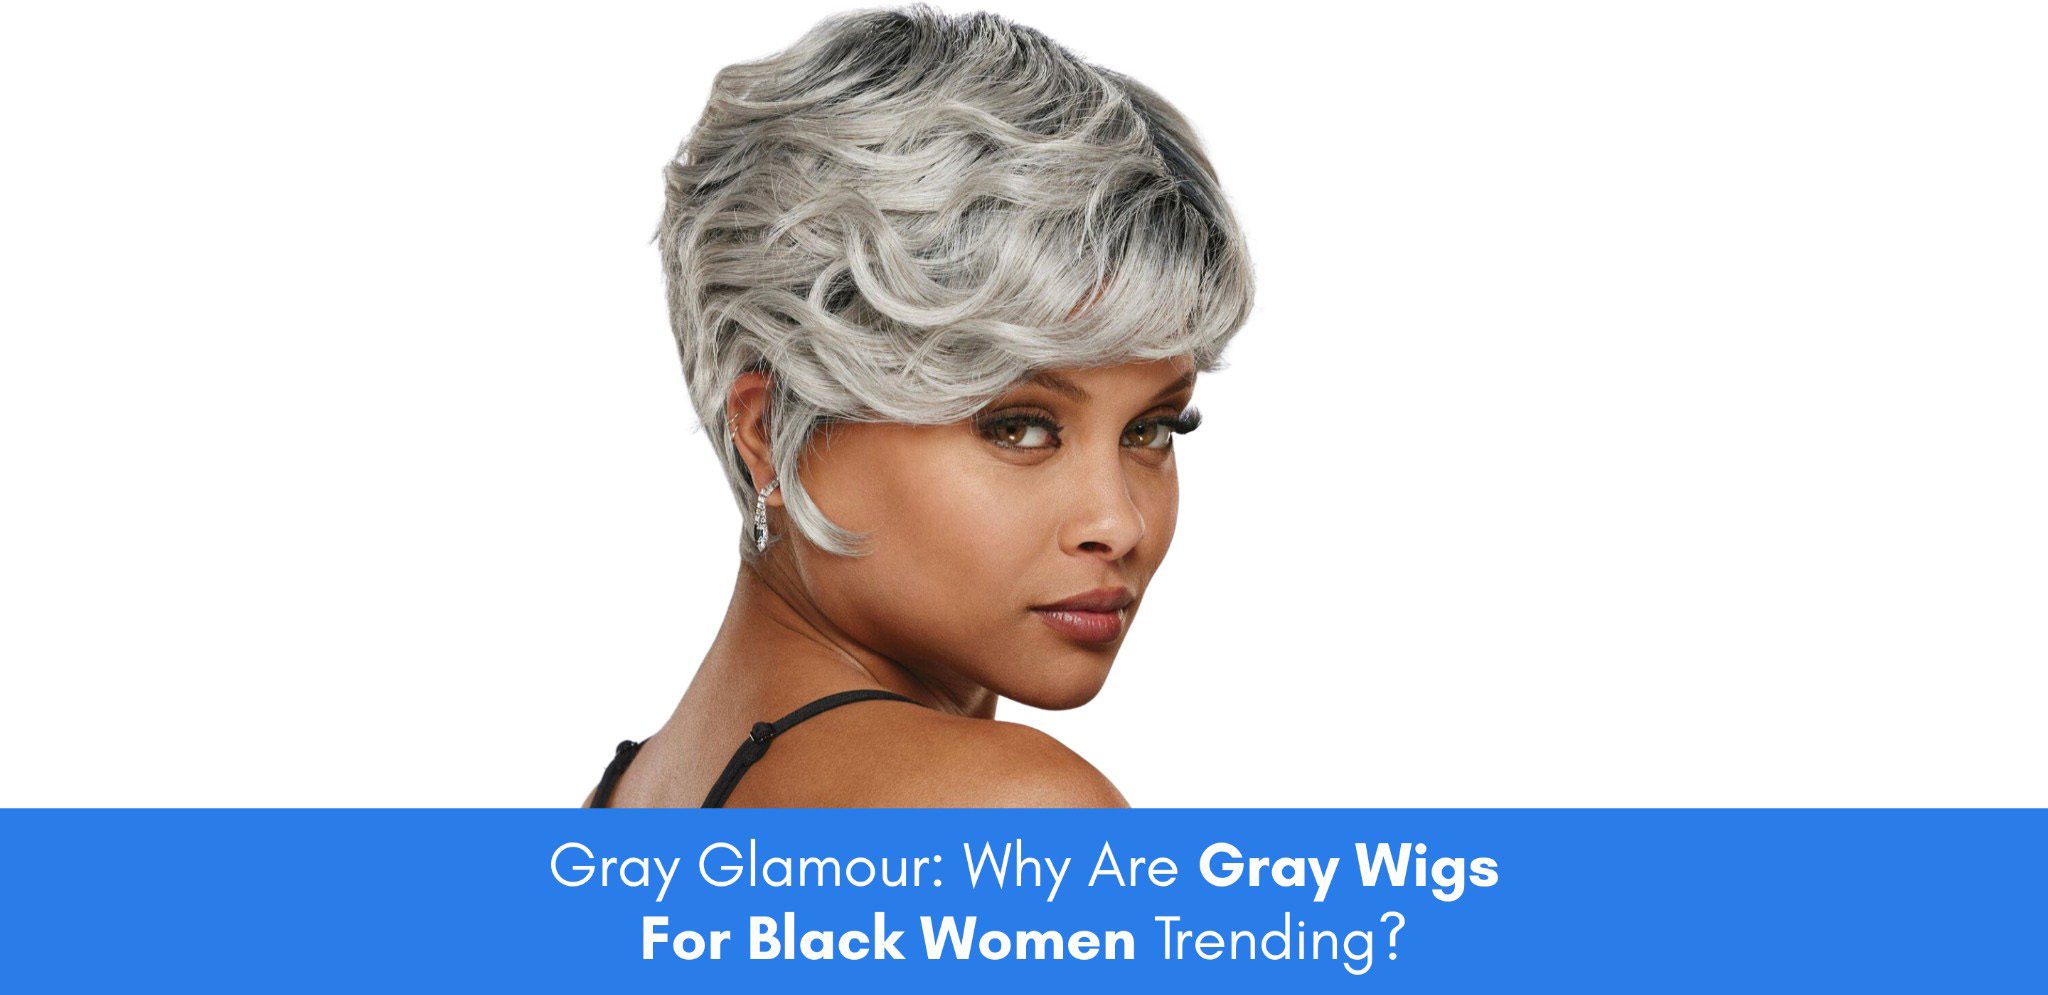 Gray Glamour: Why Are Gray Wigs For Black Women Trending?